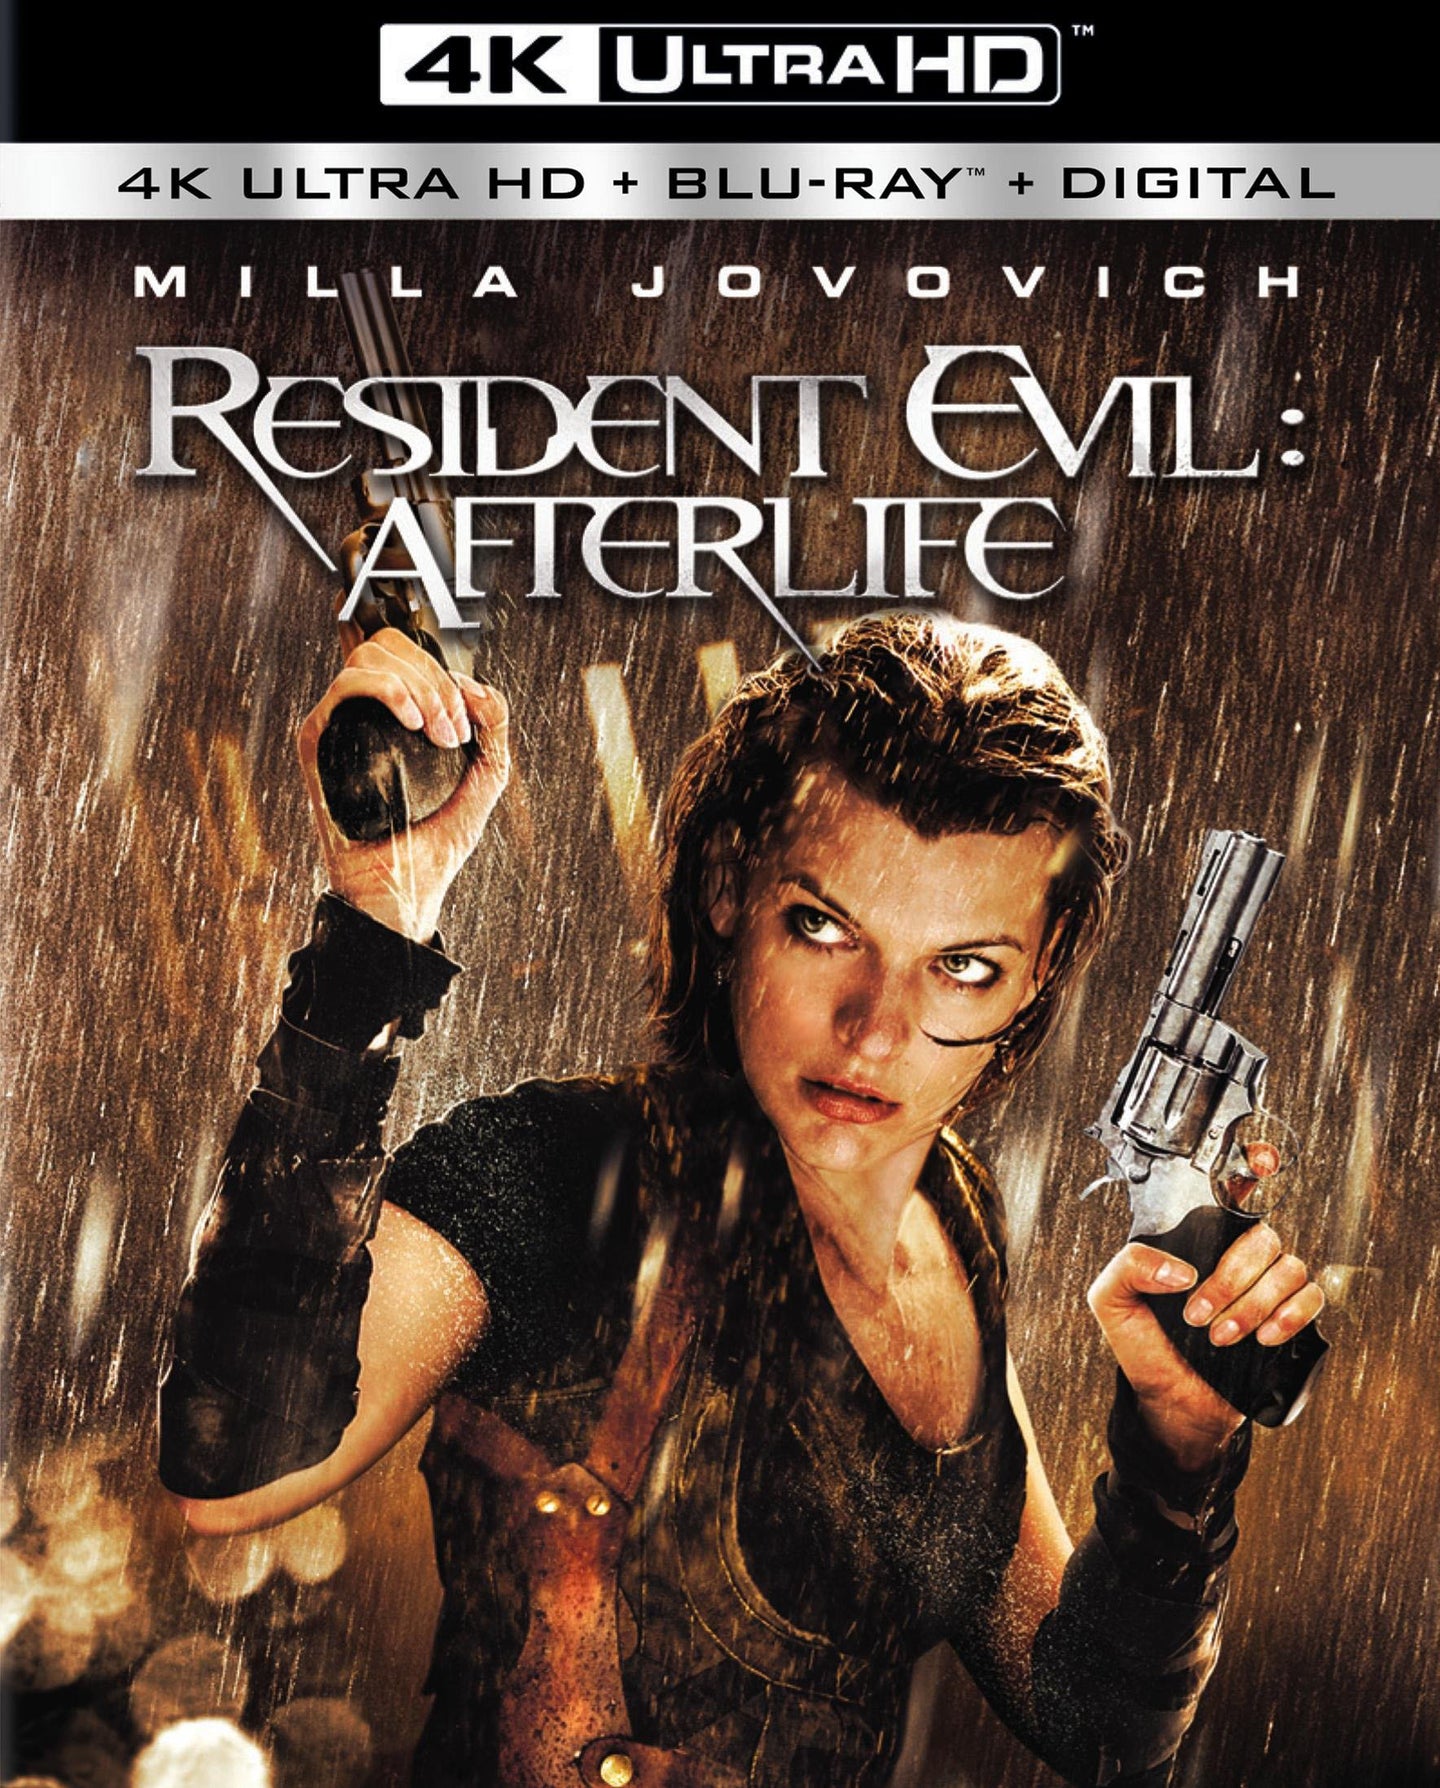 Resident Evil: Afterlife (2010) Vudu or Movies Anywhere 4K code